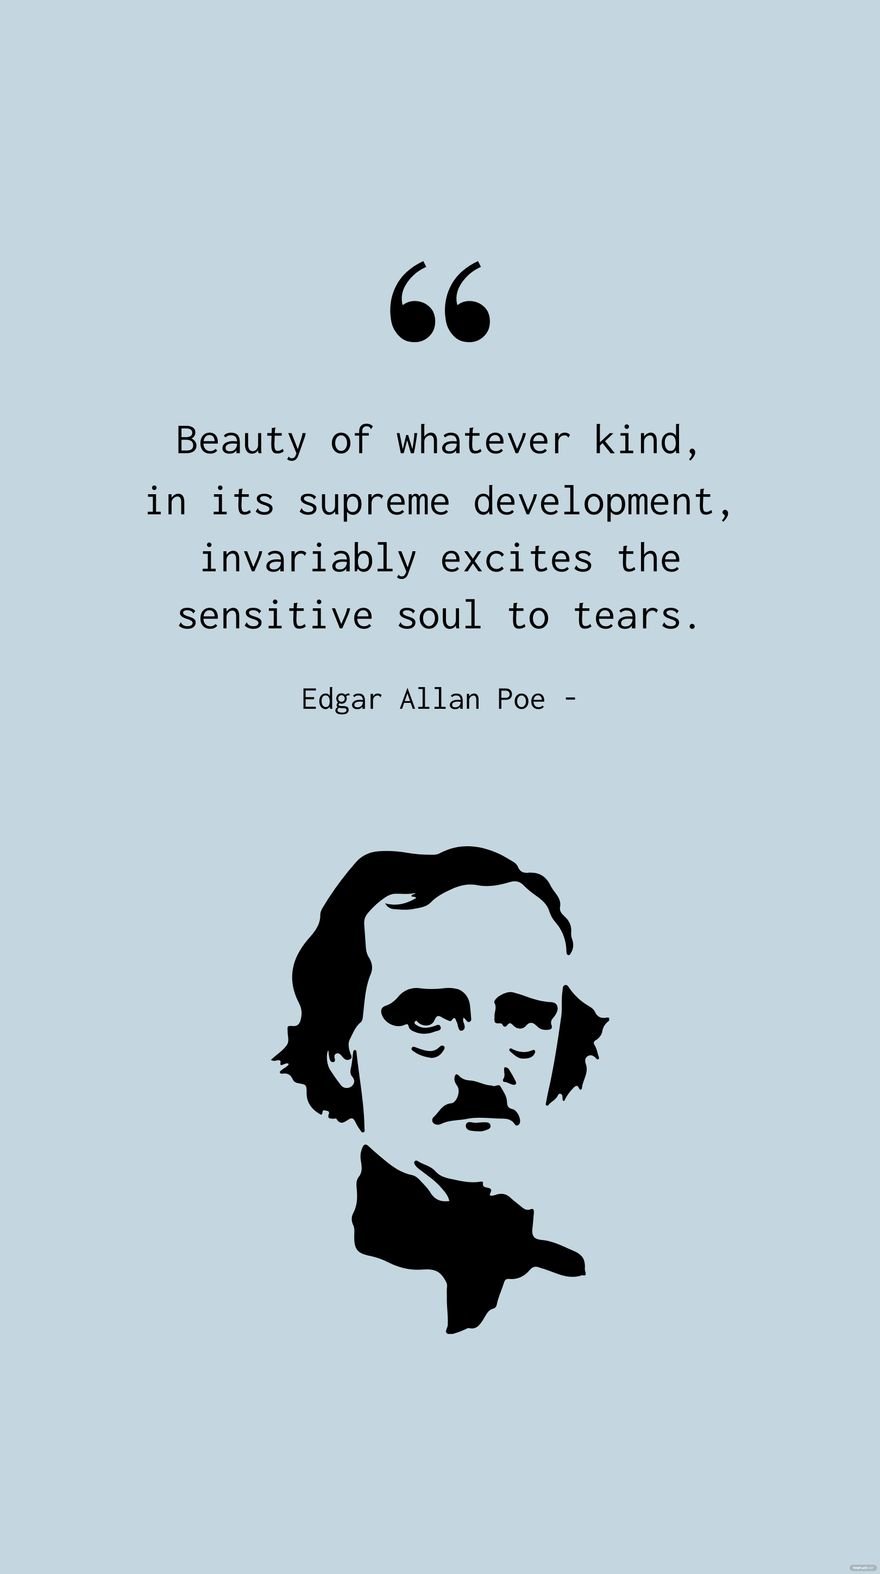 Edgar Allan Poe - Beauty of whatever kind, in its supreme development, invariably excites the sensitive soul to tears.